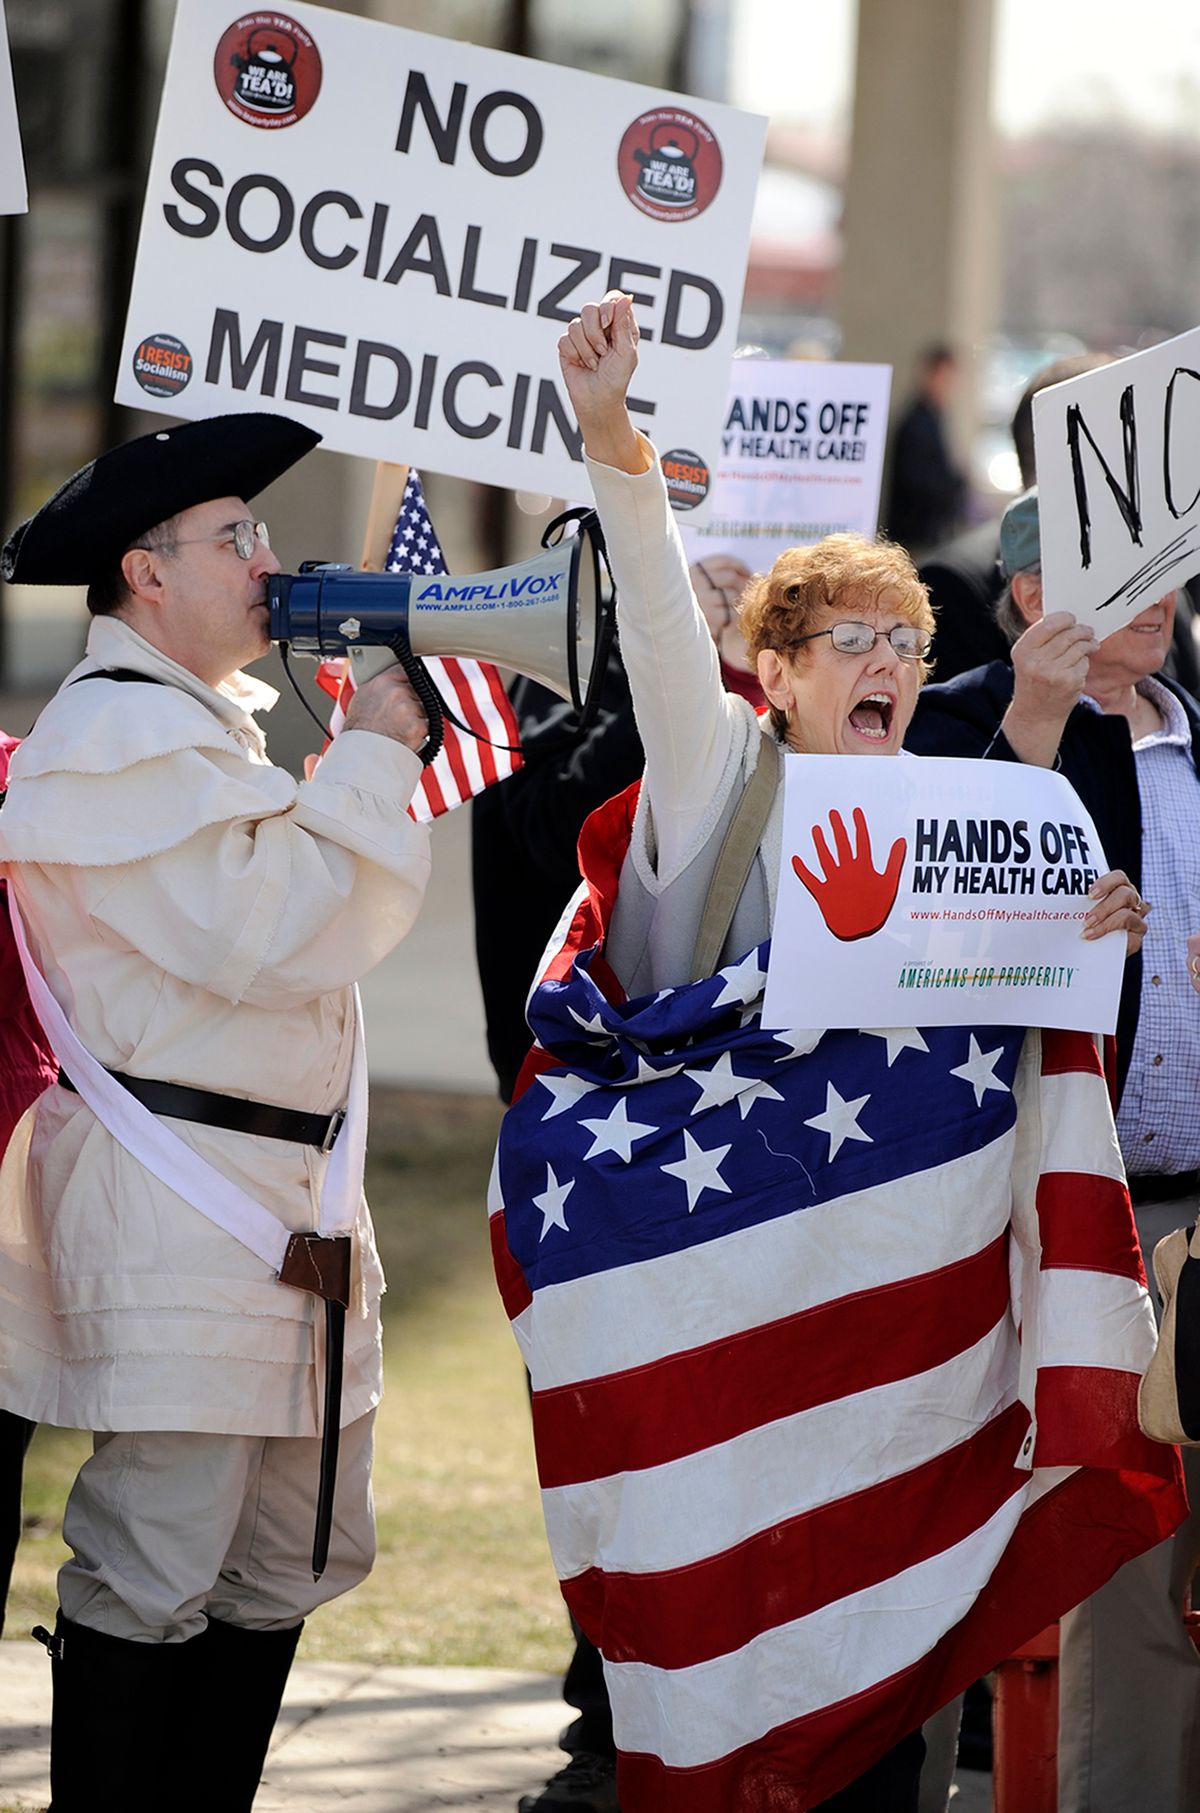 Rod Covenah, left, and Sally Sinacore, right, shout during a tea party protest against the proposed health care plan outside the office of Rep. Melissa Bean, D-Ill., in Schaumburg, Ill. on Tuesday, Mar. 16, 2010. (AP Photo/Paul Beaty) (Paul Beaty)